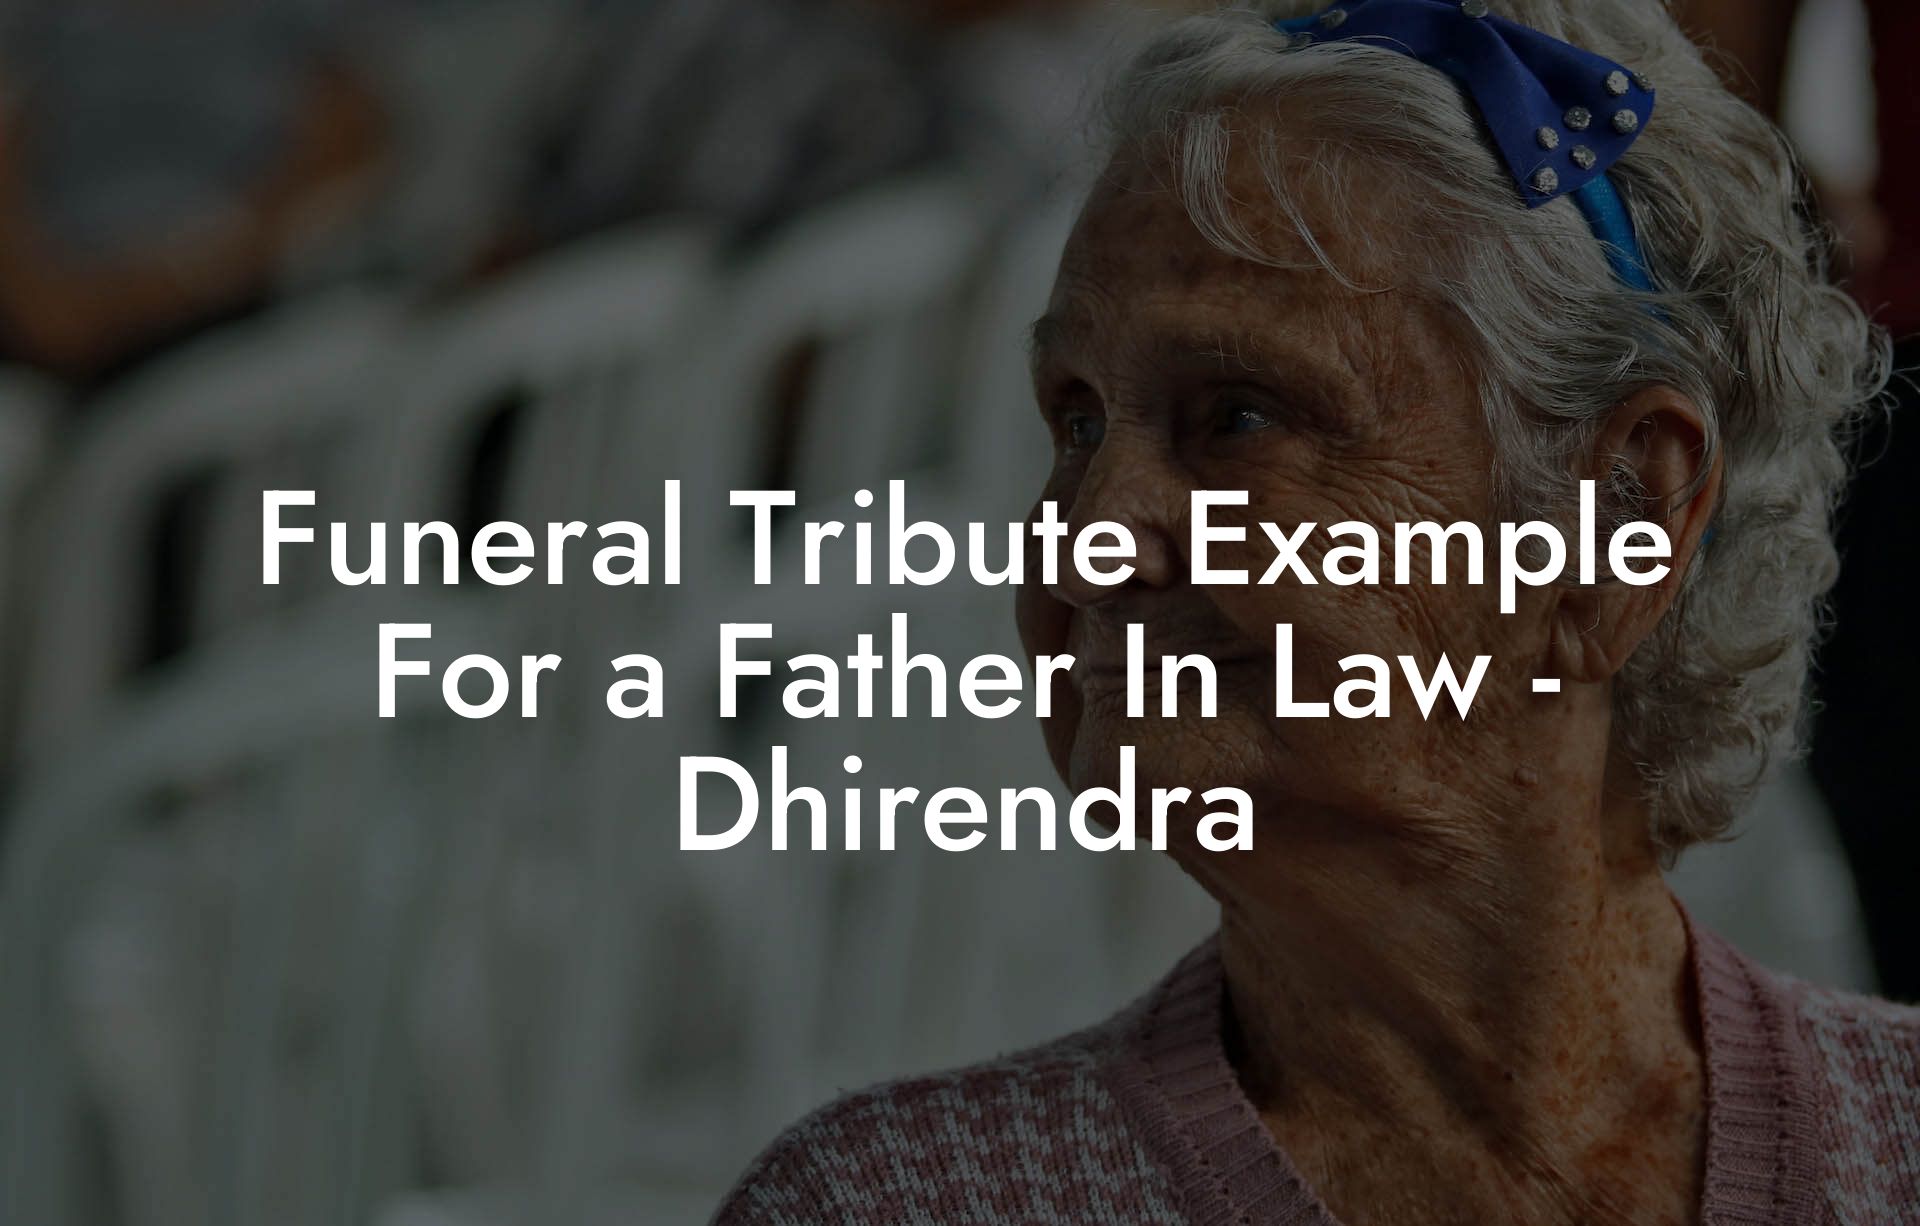 Funeral Tribute Example For a Father In Law - Dhirendra